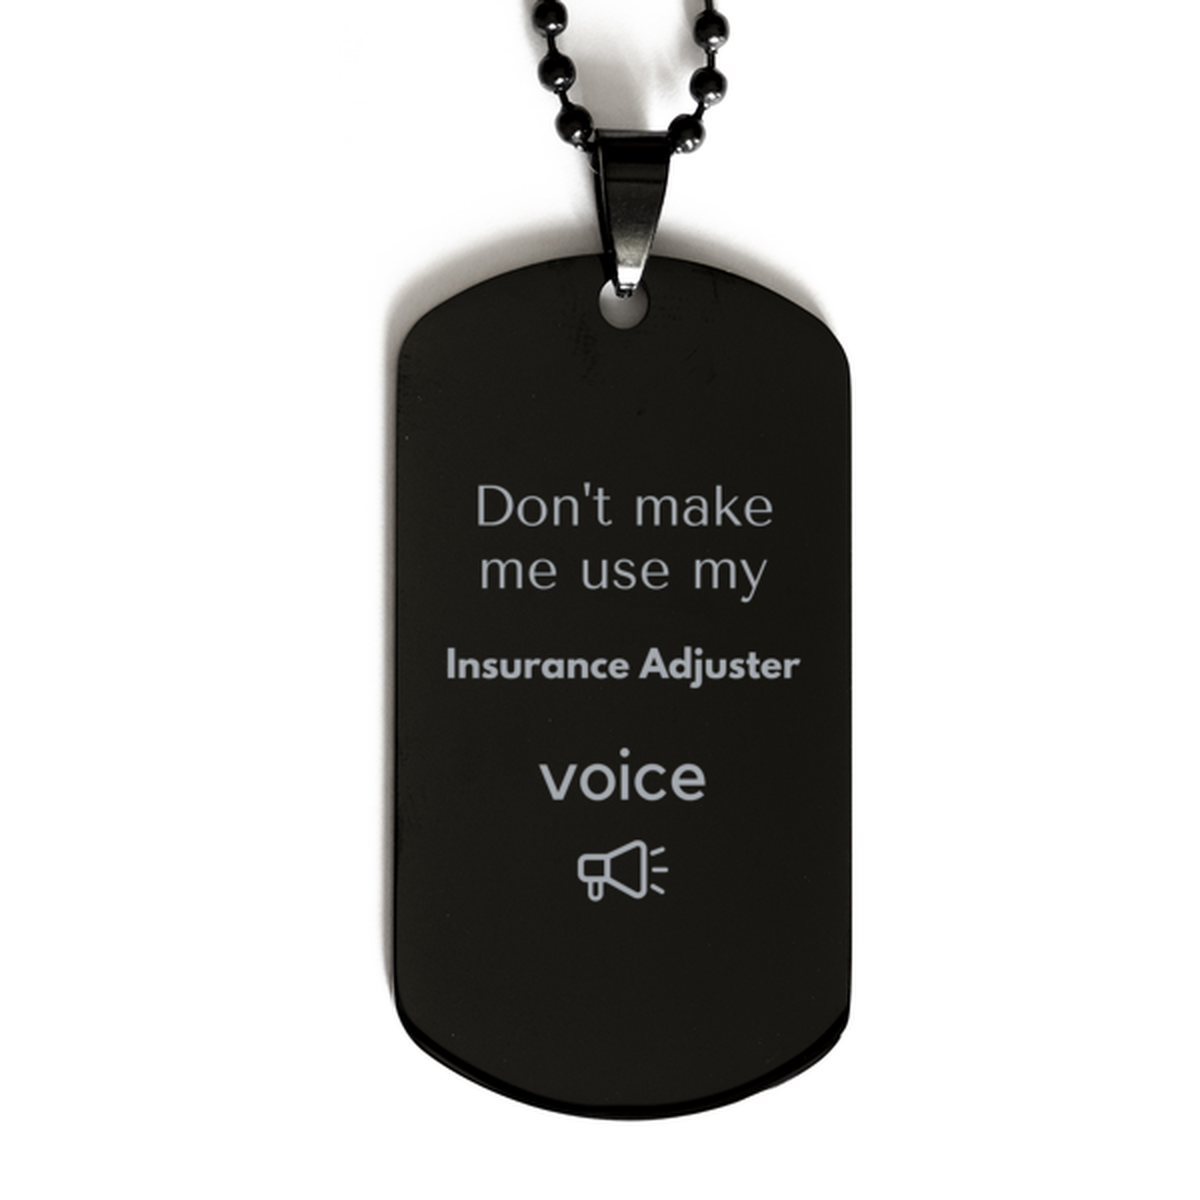 Don't make me use my Insurance Adjuster voice, Sarcasm Insurance Adjuster Gifts, Christmas Insurance Adjuster Black Dog Tag Birthday Unique Gifts For Insurance Adjuster Coworkers, Men, Women, Colleague, Friends